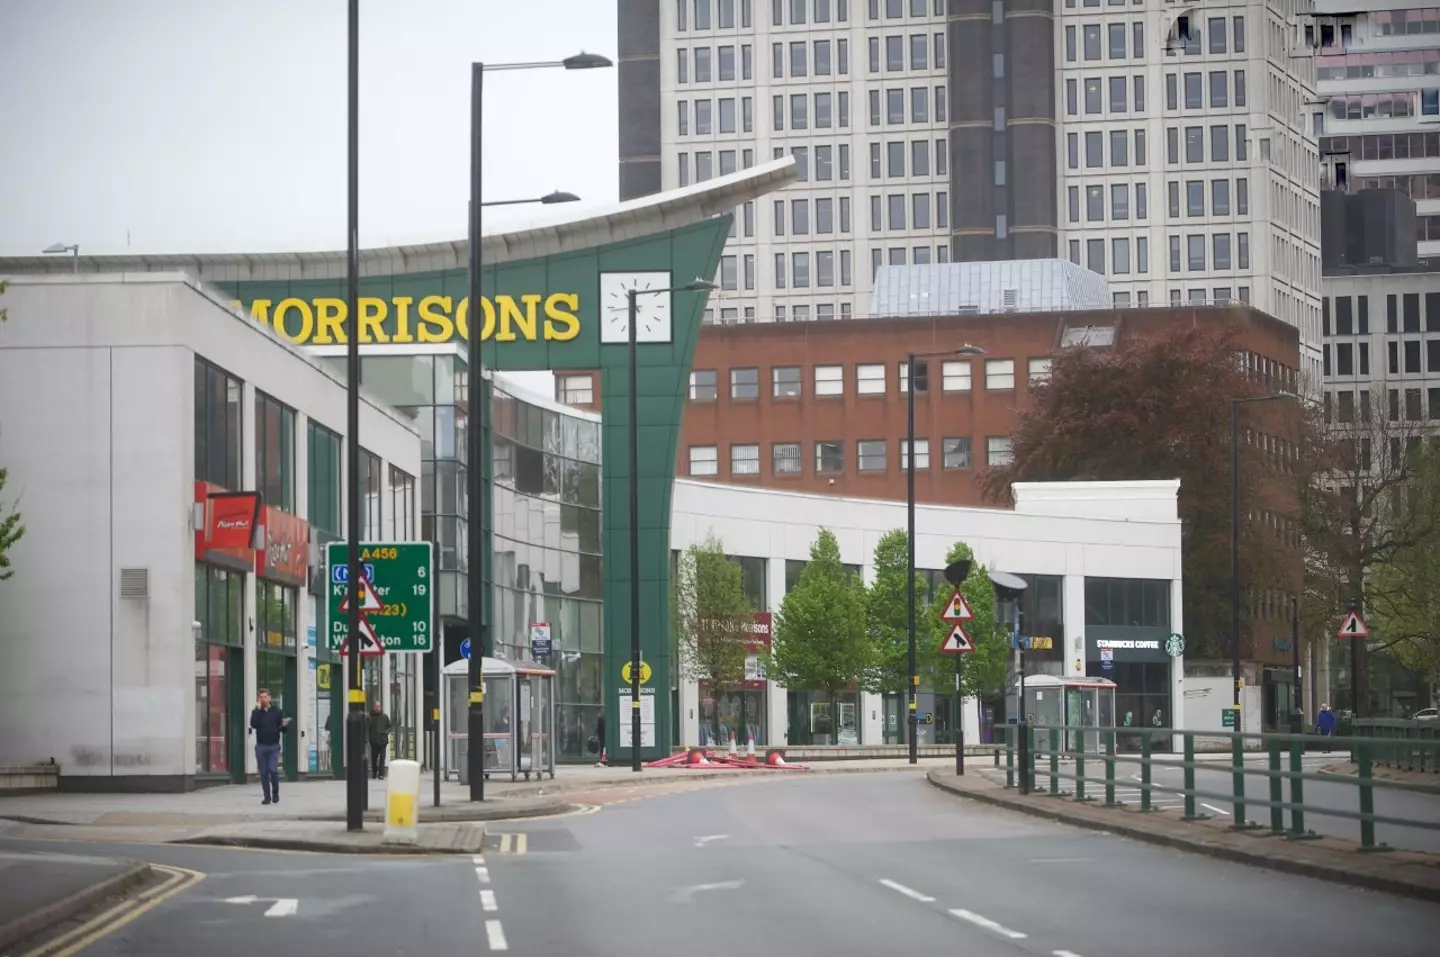 The new system has been put in place at the Hagley Road Morrisons in Birmingham.